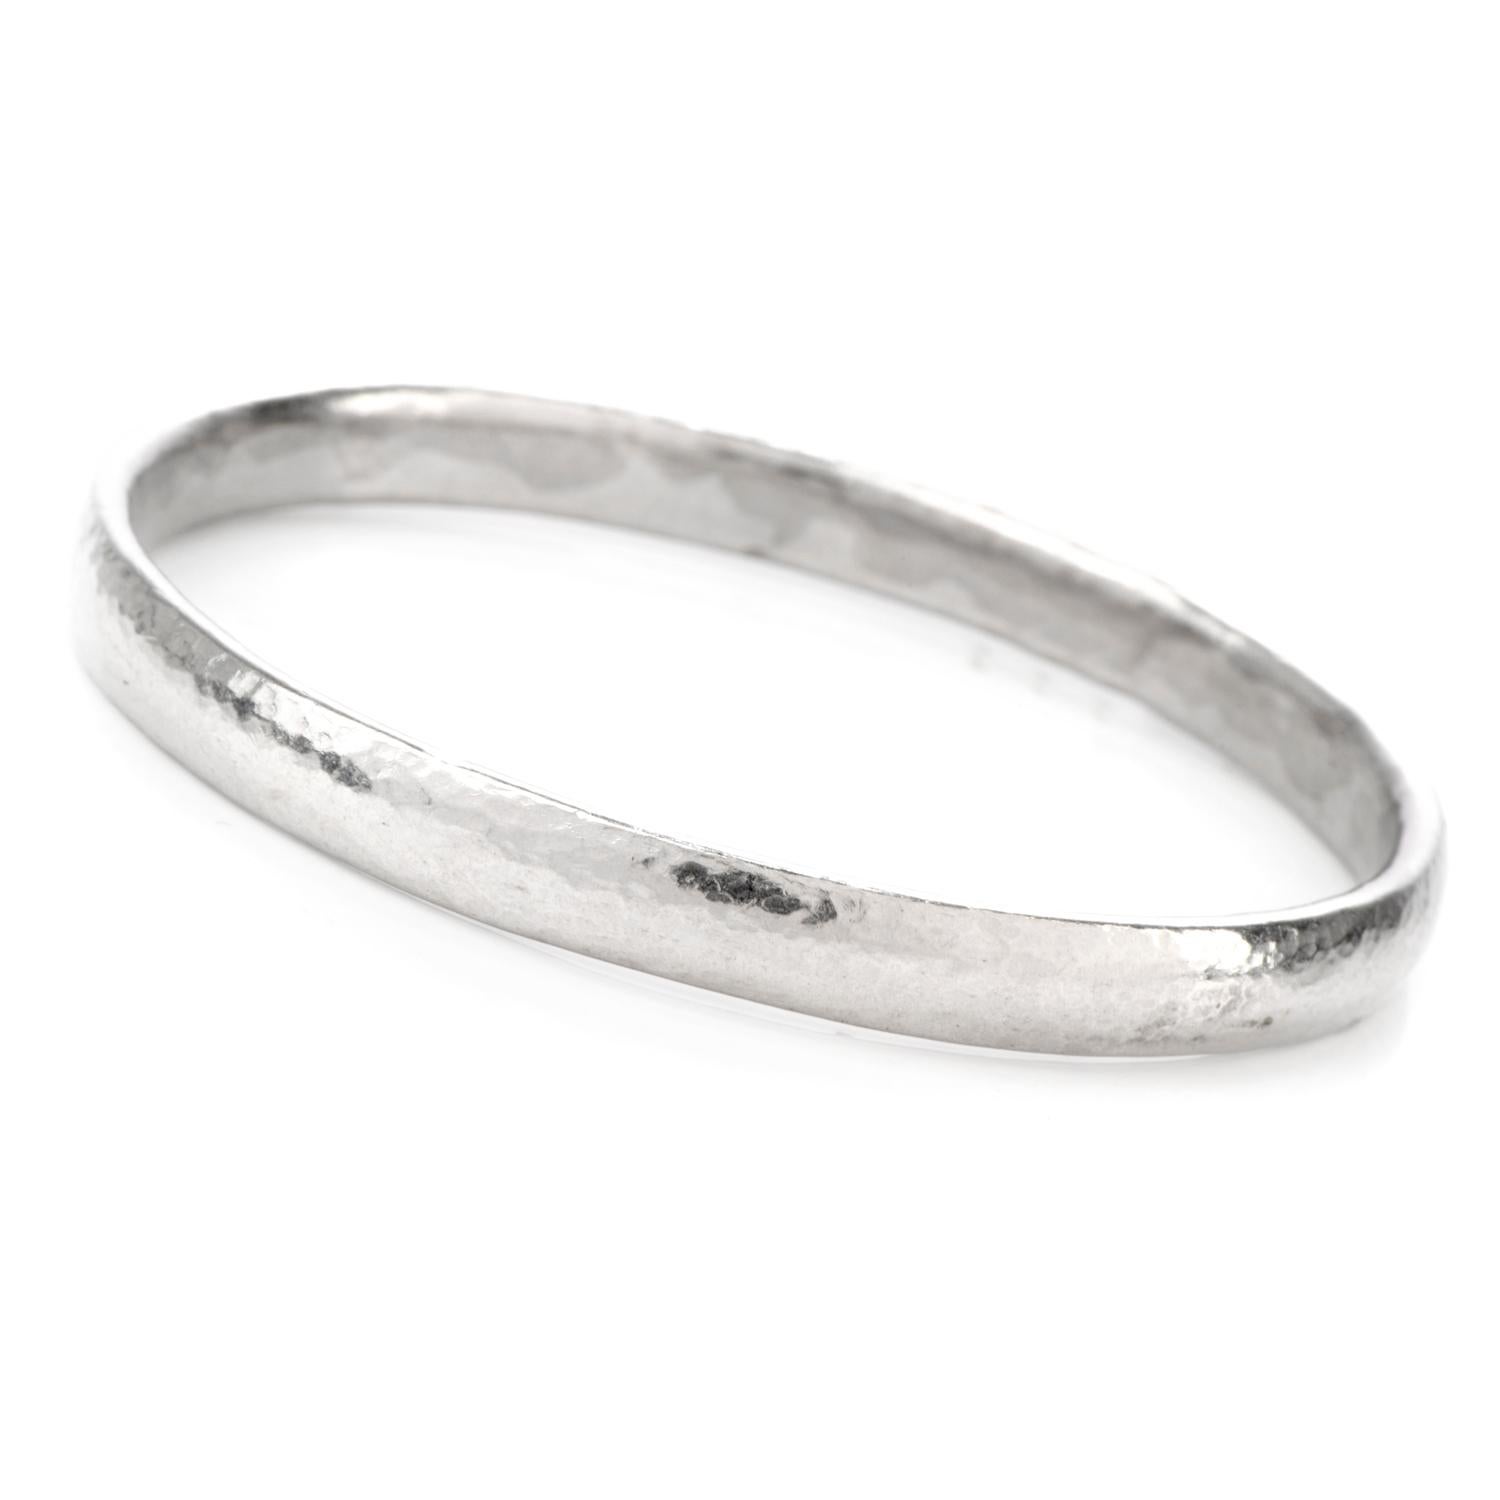 This Designer Gurhan bangle bracelet was finished with a hand applied hammered

finish and crafted in Luxurious Platinum.

This classic design is easily stacked allowing a different 

look each time it's worn.

Measuring appx. 7.1mm x 7.5